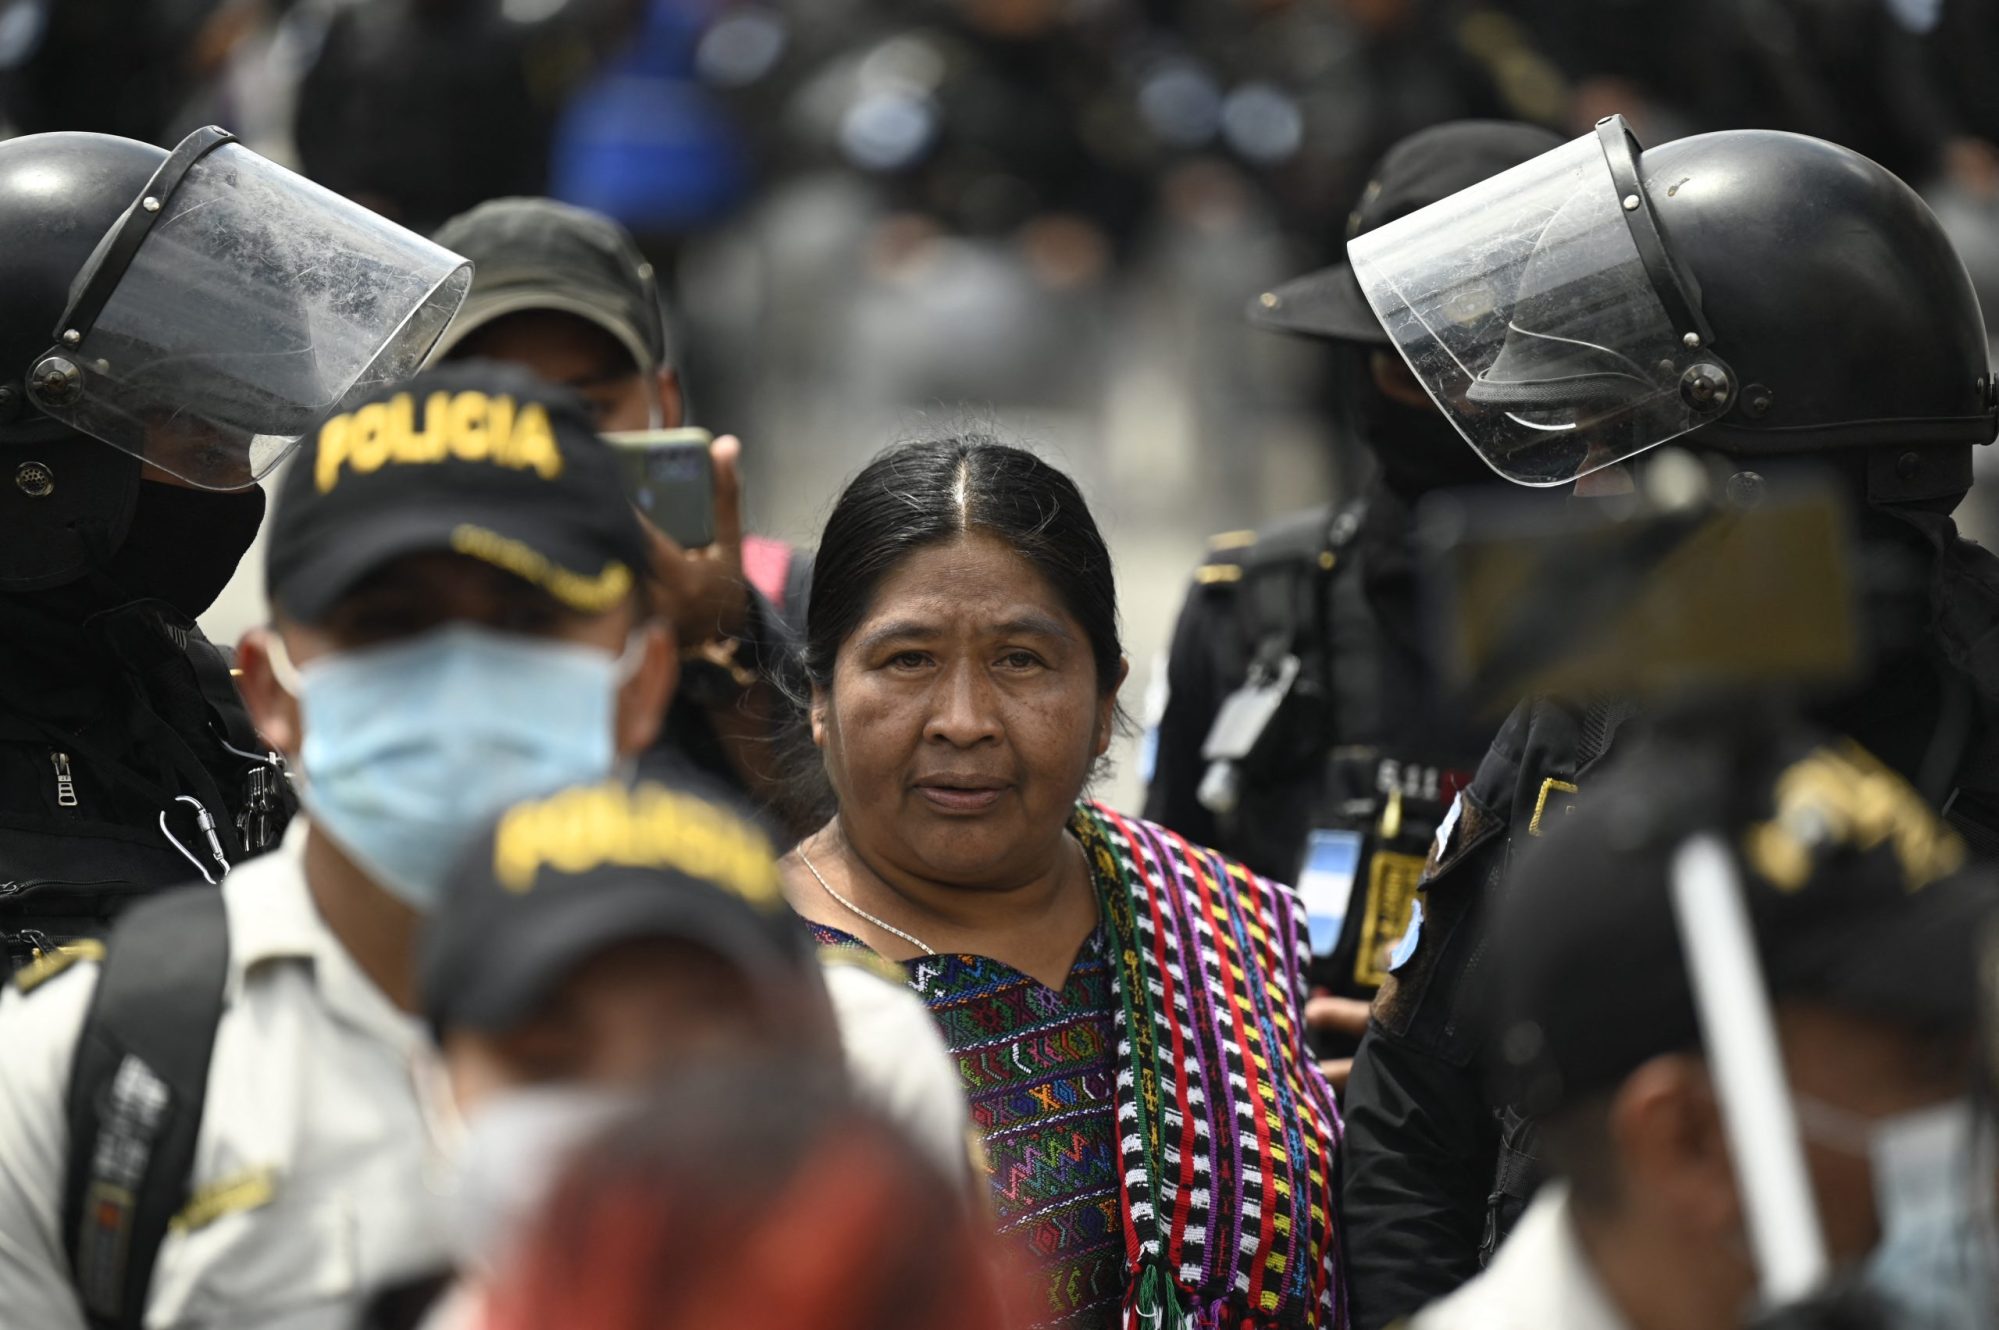 Guatemalan deputy Vicenta Jerónimo marches with members of the Peasant Development Committee (CODECA) during a protest against alleged acts of corruption of Guatemalan President Alejandro Giammattei's government and asking the resignation of US-sanctioned Attorney General Consuelo Porras in Guatemala City on September 21, 2022. Photo by JOHAN ORDONEZ/AFP via Getty Images